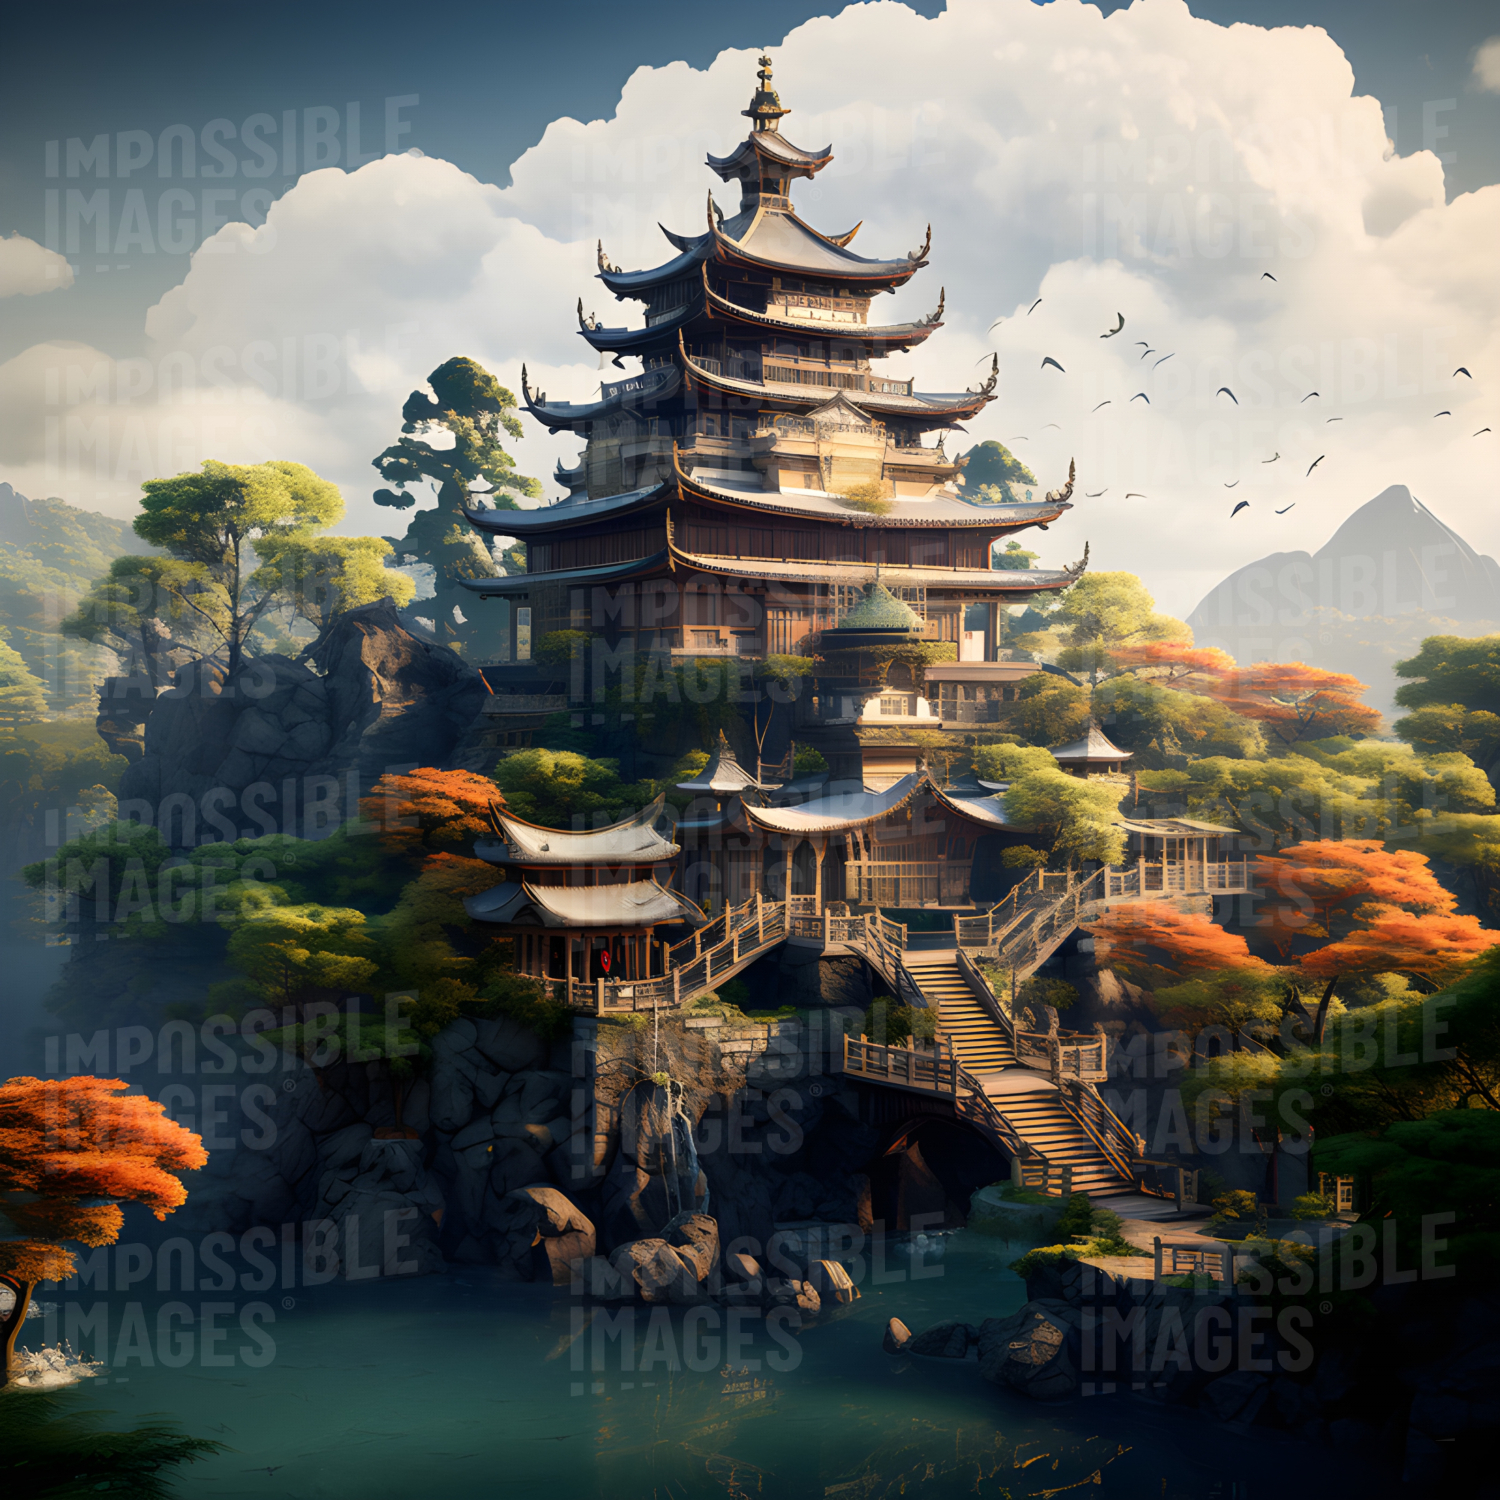 Concept art of a fantastic traditional Japanese mansion in the mountains